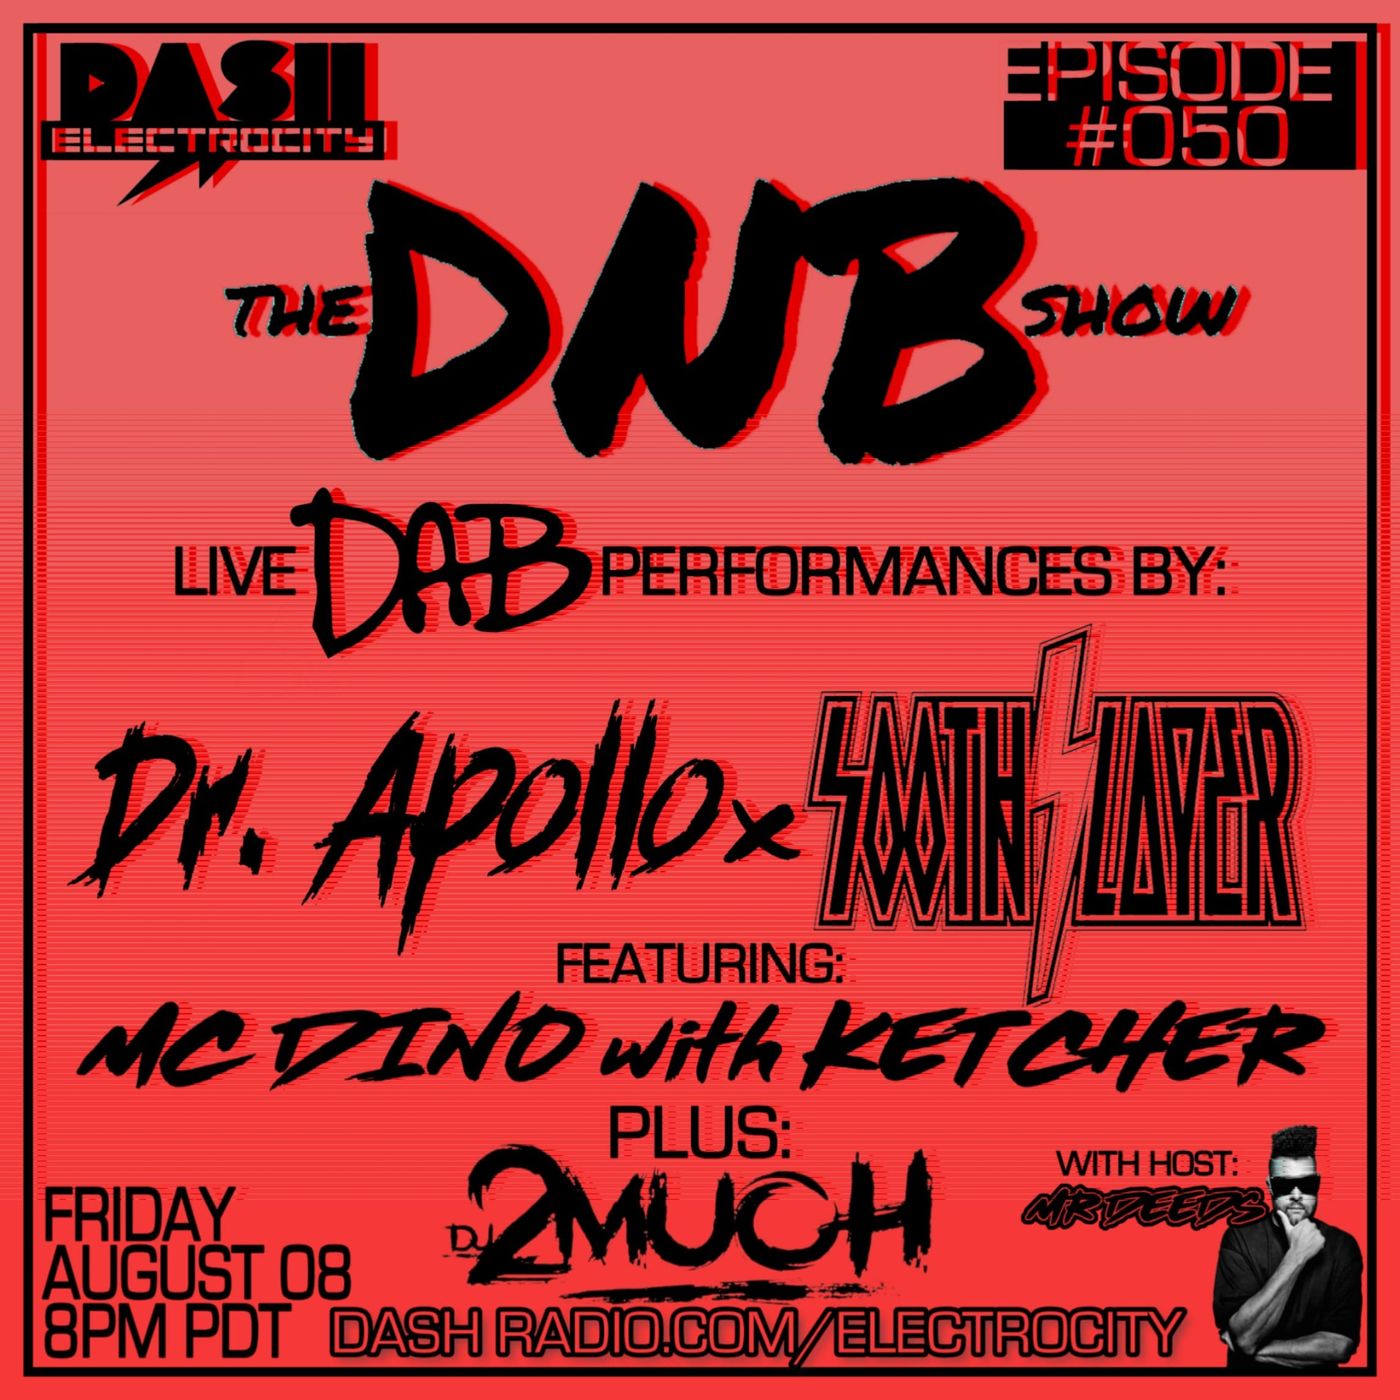 the DNB show Episode 50 (guest mix Dr Apollo, Soothslayer, MC Dino with Ketcher + 2Much)